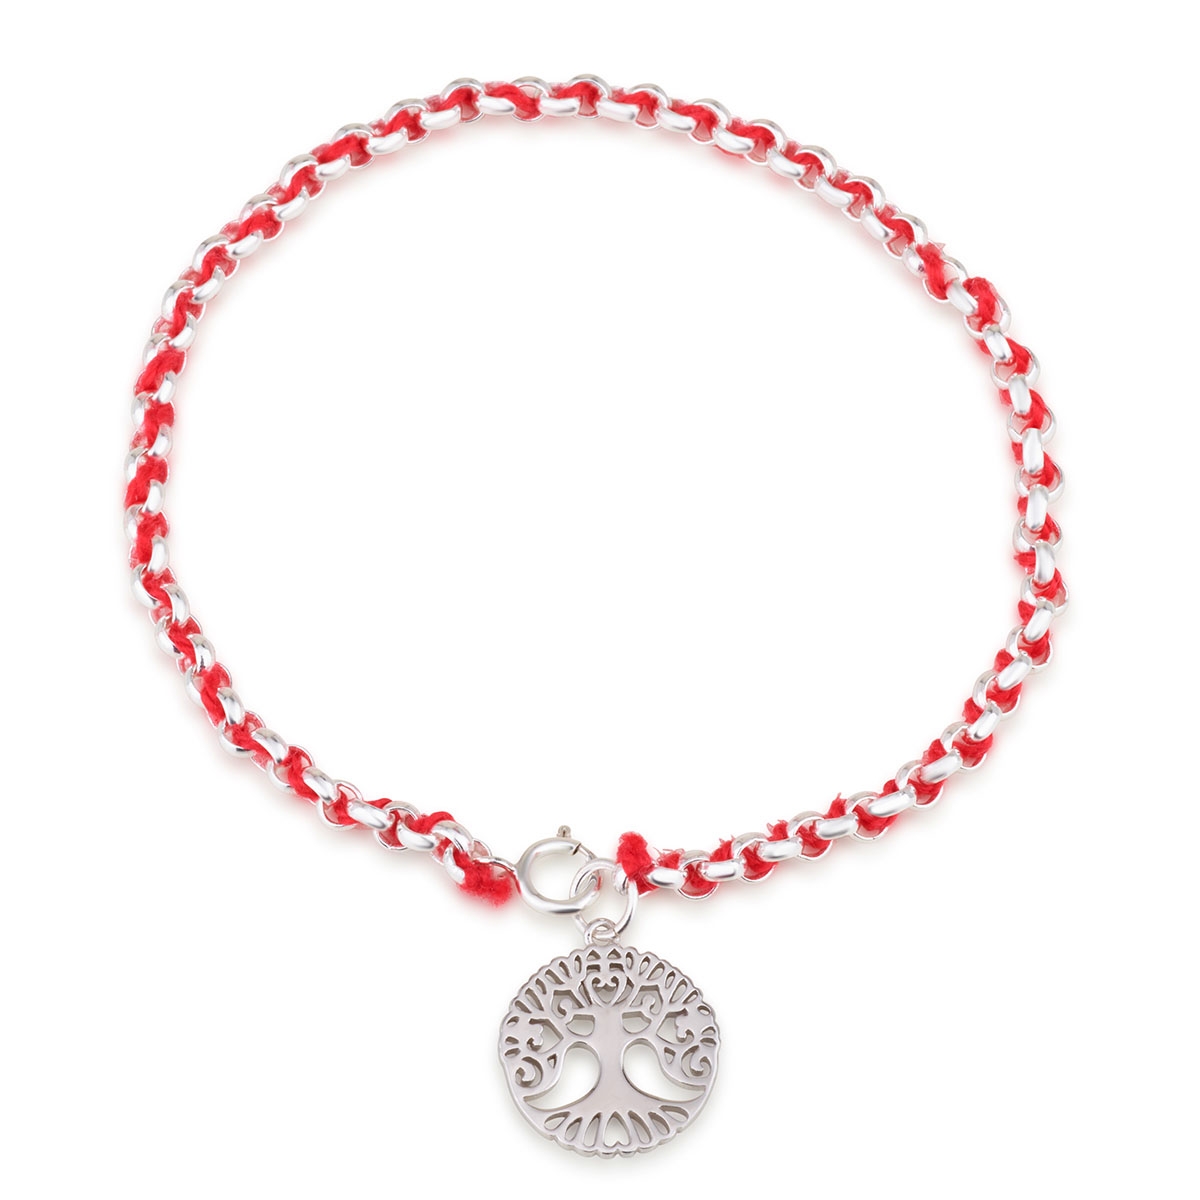 Sterling Silver and Red String Kabbalah Bracelet With Tree of Life Design - 1